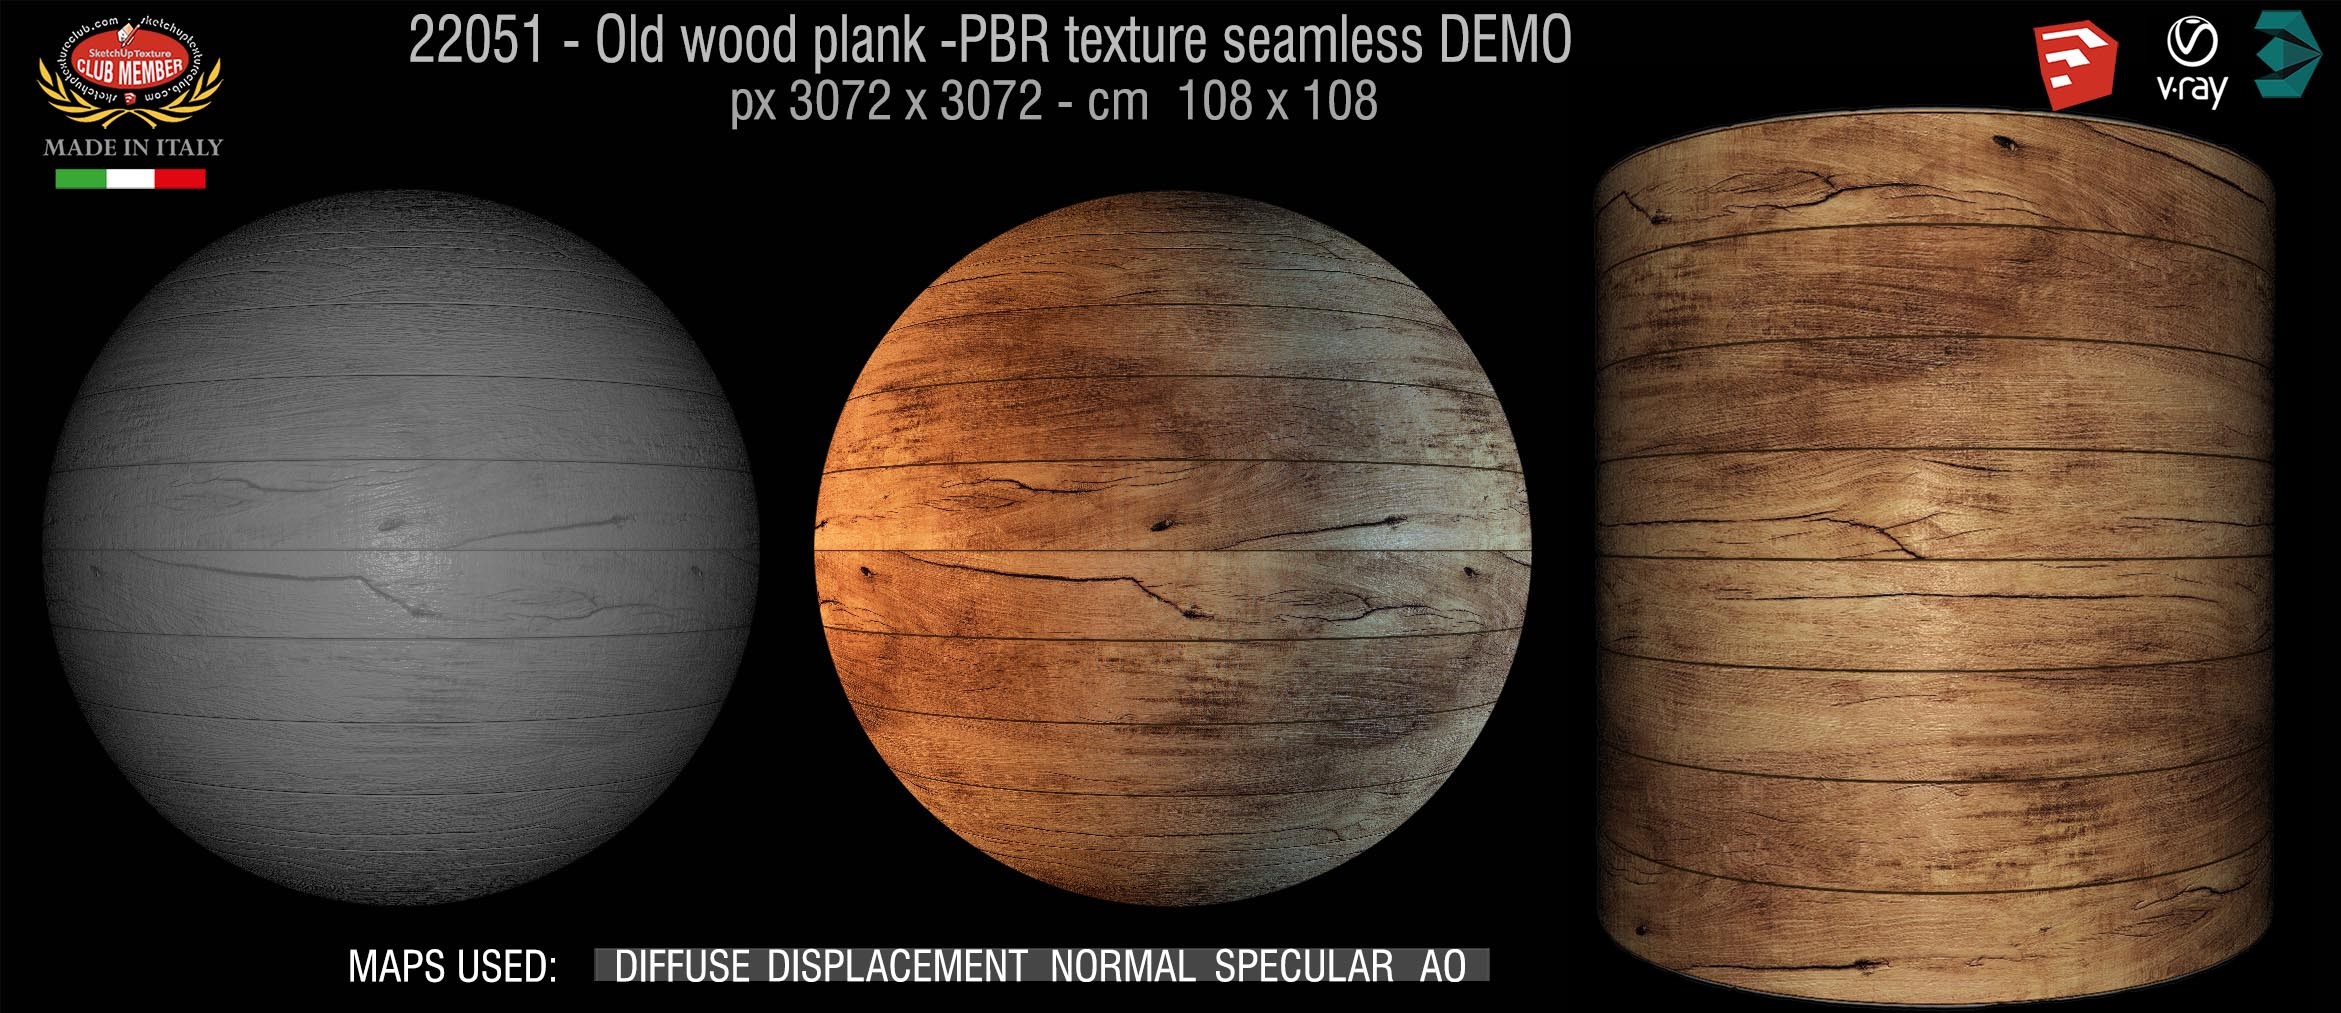 22051 Old wood plank PBR texture seamless DEMO